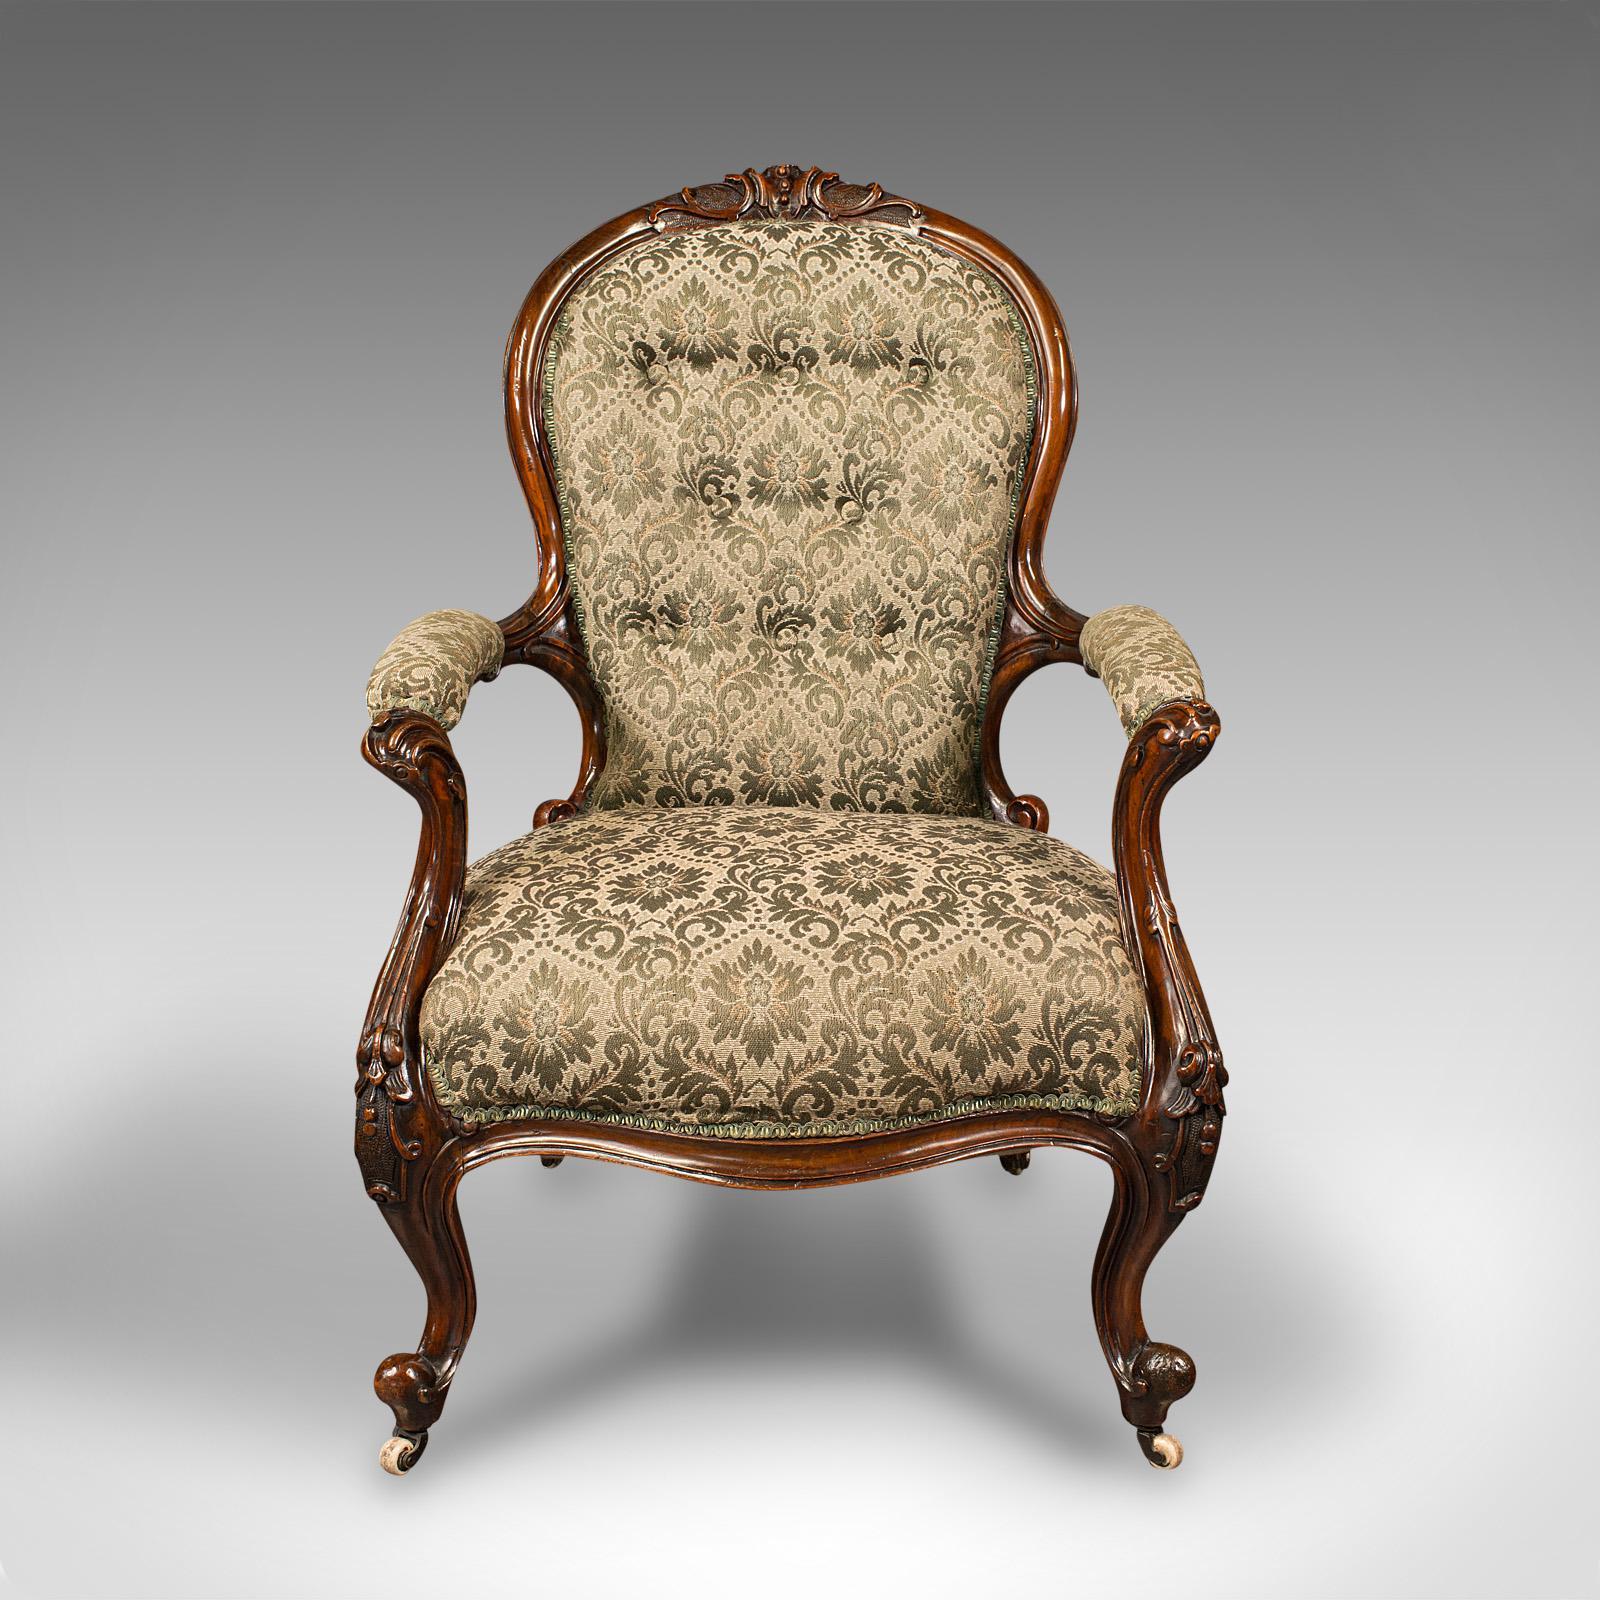 This is an antique salon chair. An English, walnut armchair, dating to the early Victorian period, circa 1840.

Beautifully appointed salon chair with relaxing, lounge or fireside appeal
Displays a desirable aged patina and in good order
Select